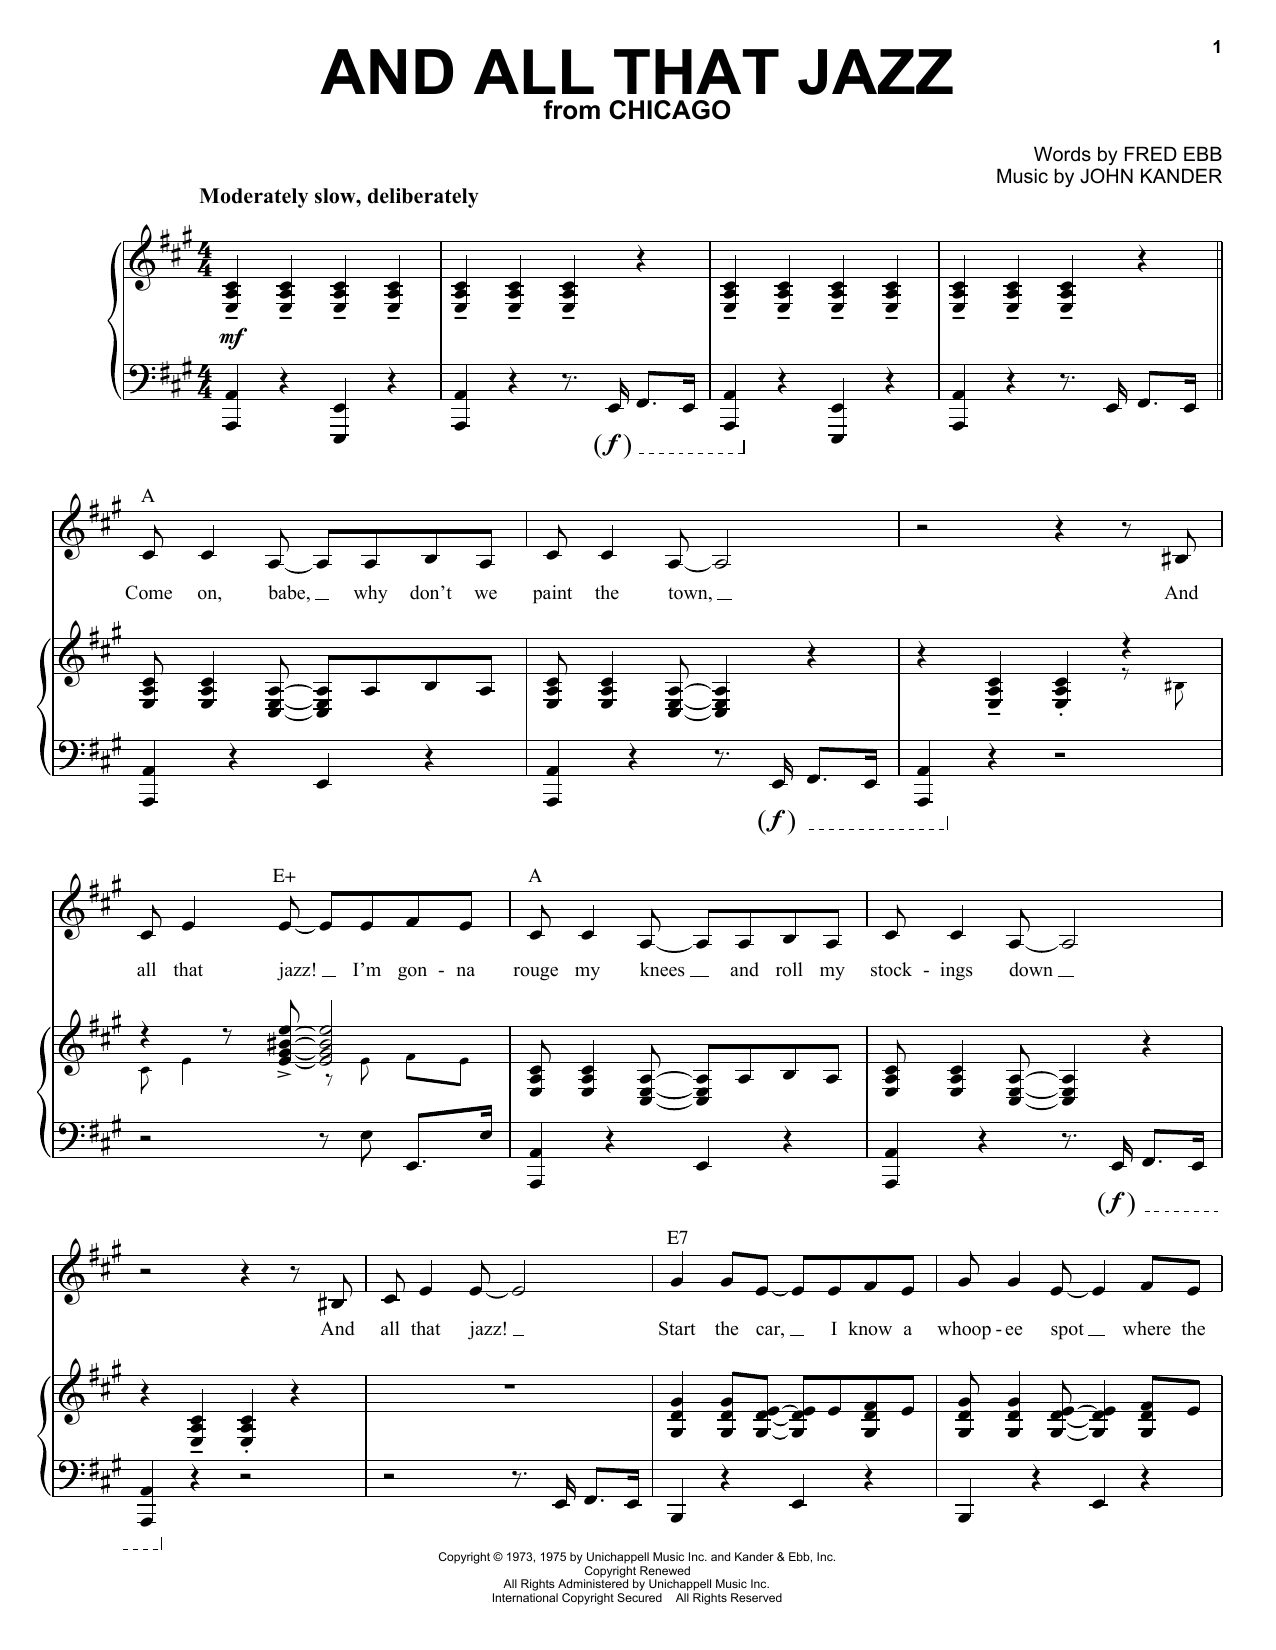 Download Kander & Ebb And All That Jazz Sheet Music